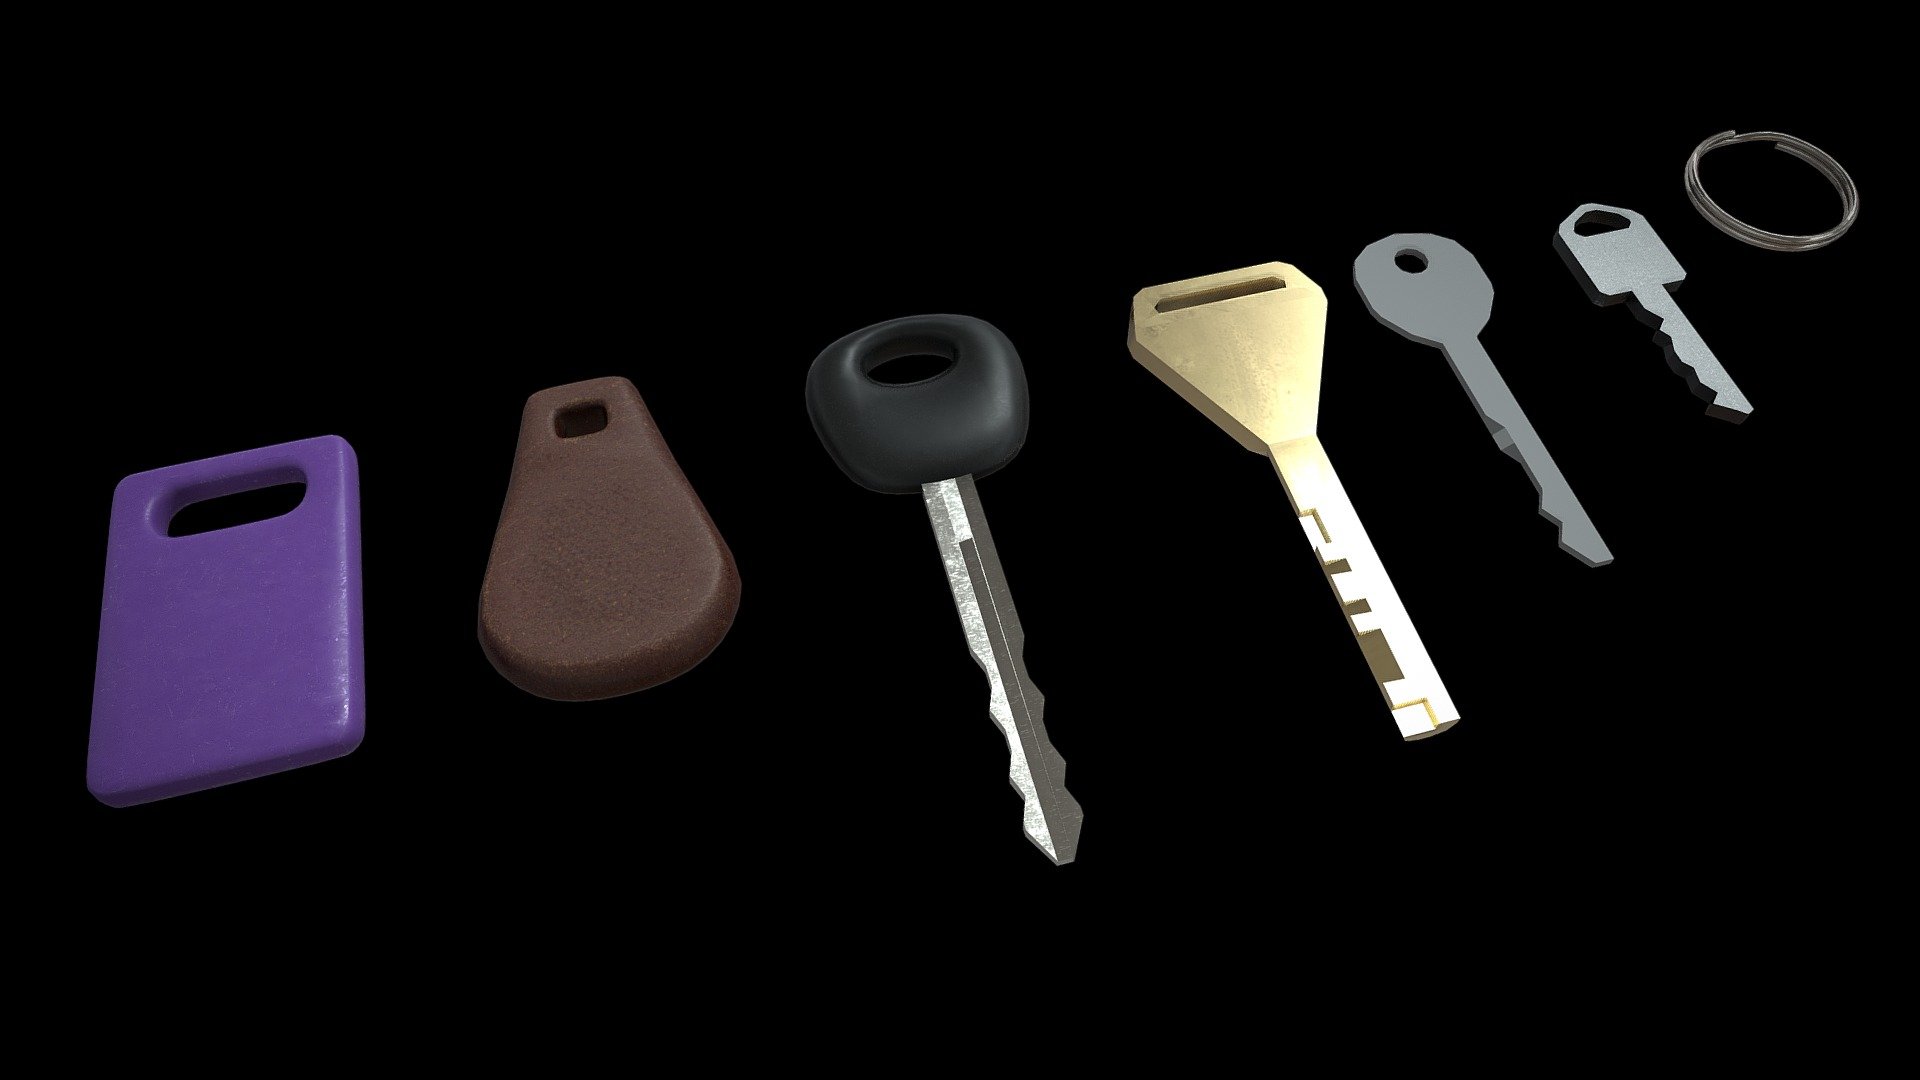 Textured lowpoly keys. NFC tags, keyring, car key

8 models in total. 

includes prebuilt keyset with included assets - Lowpoly Keys - Buy Royalty Free 3D model by tamminen 3d model